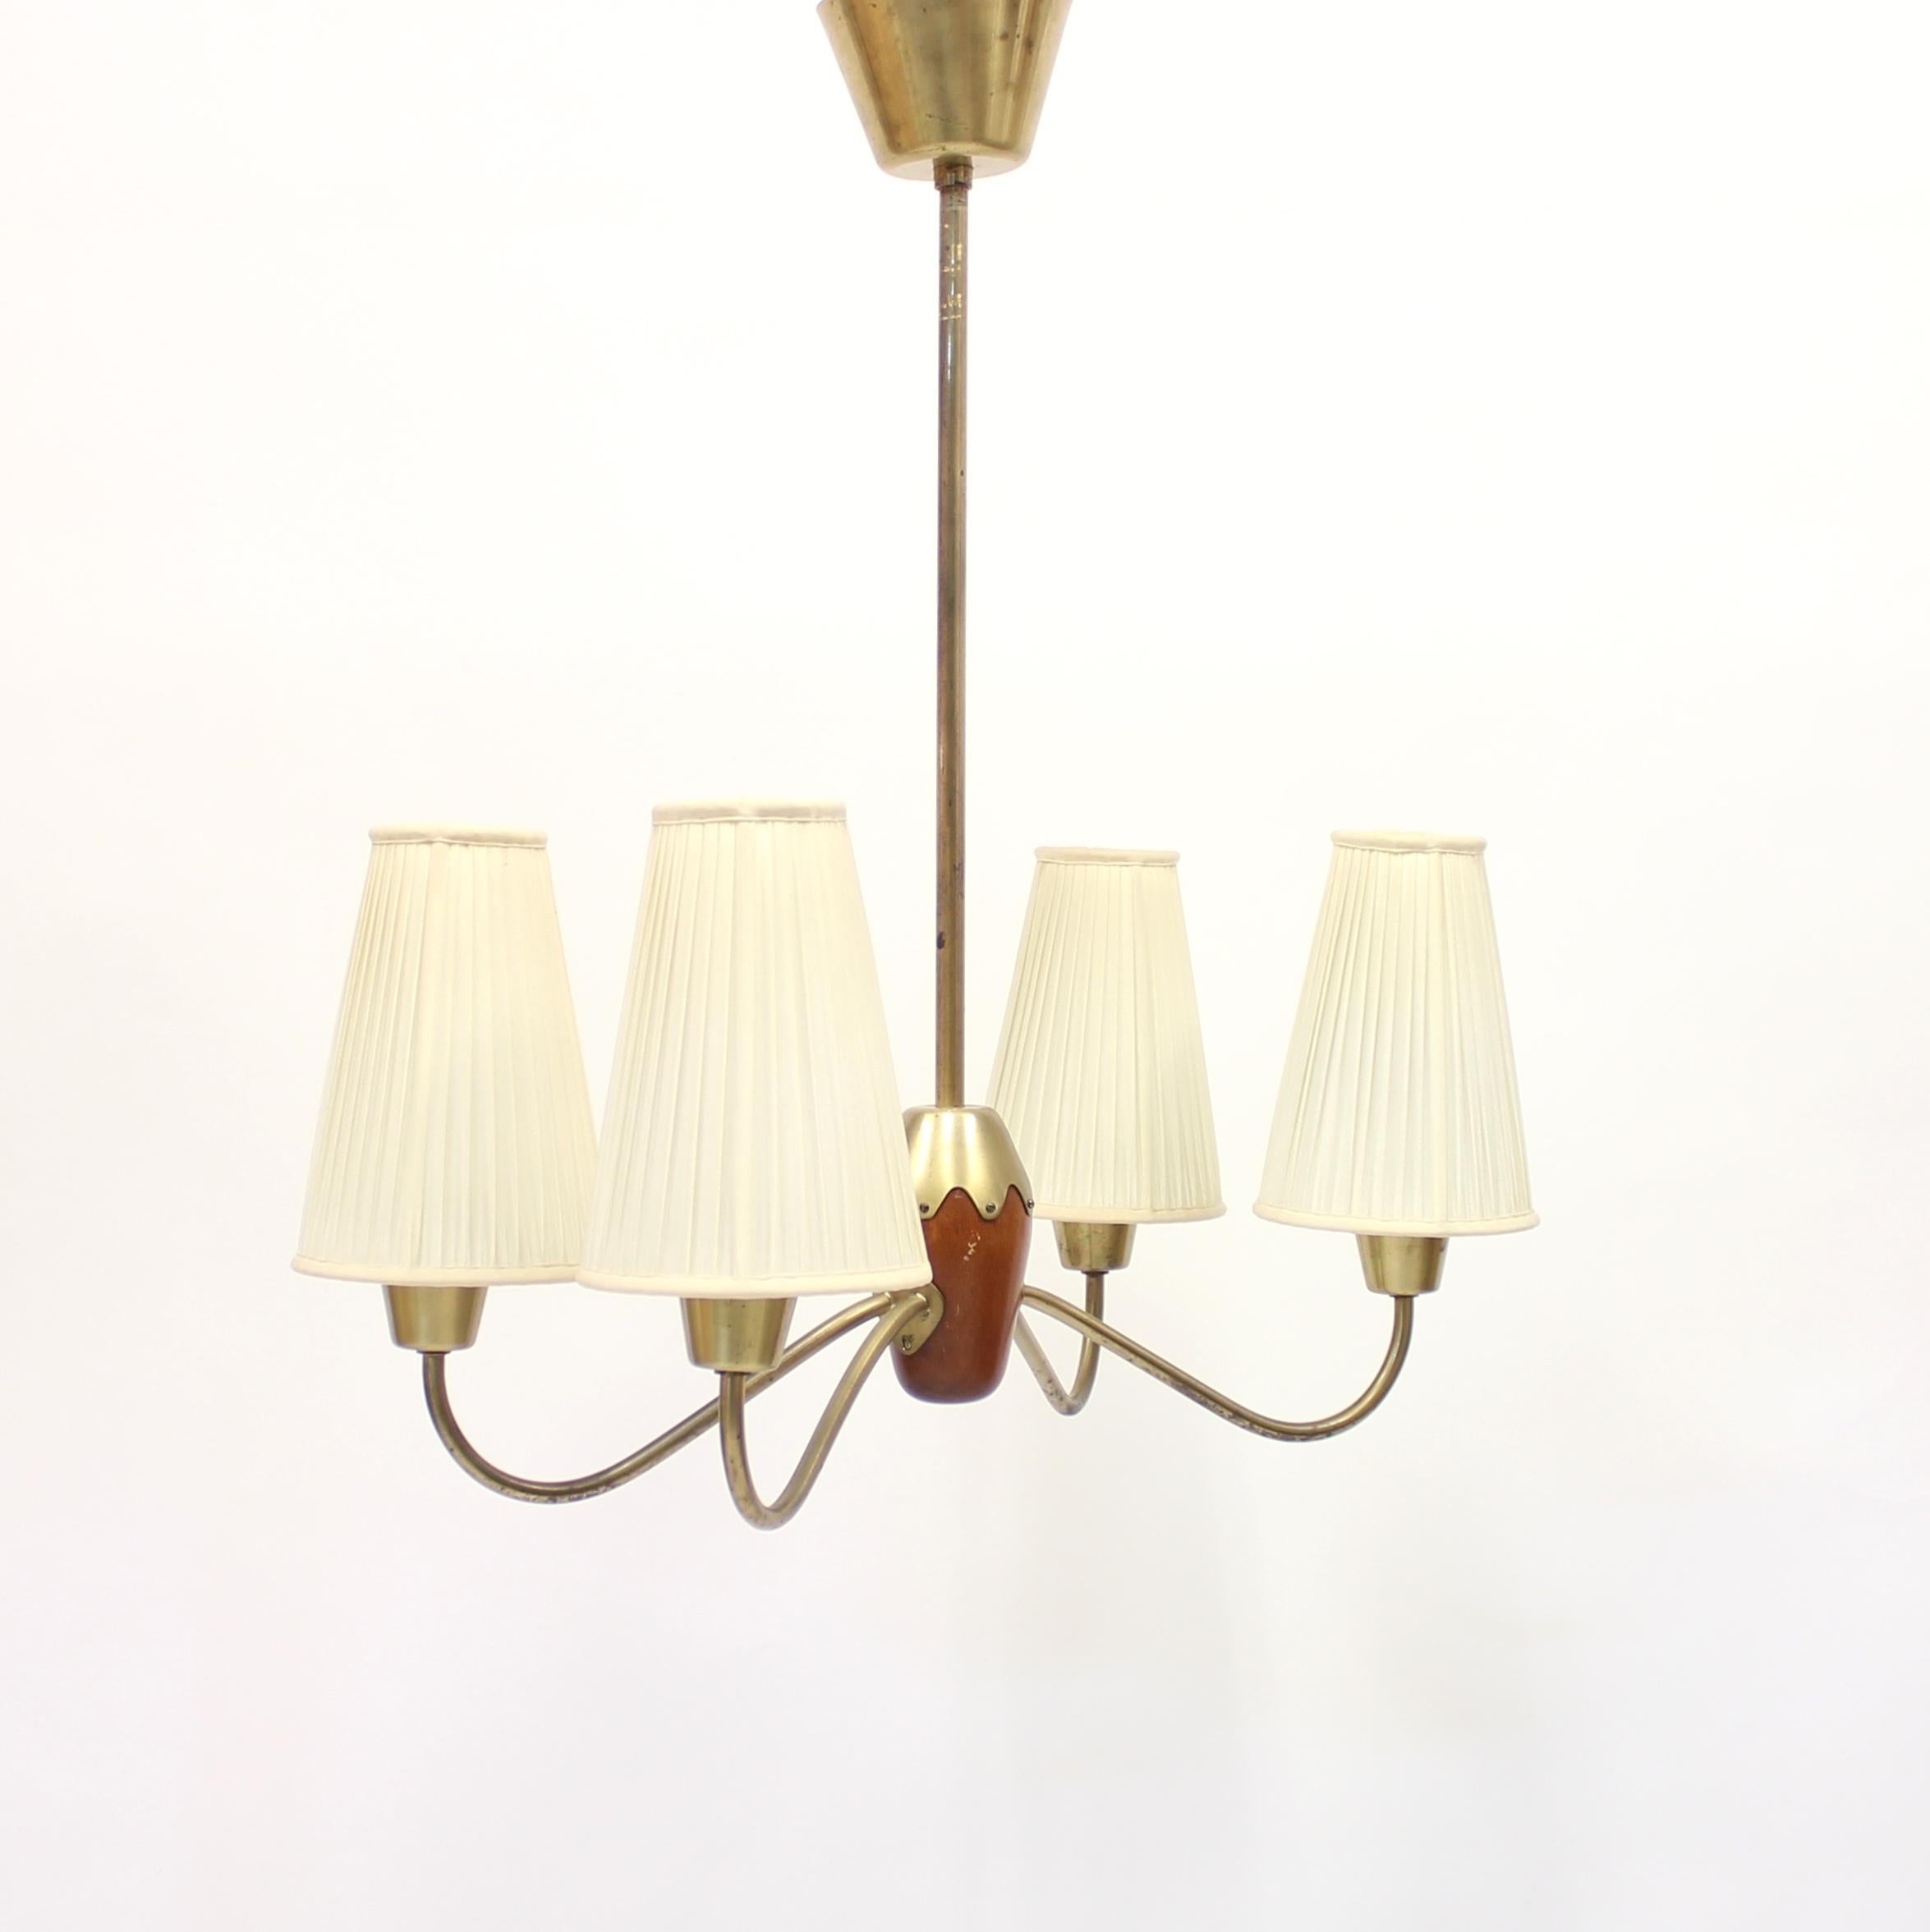 Swedish 4-Light Ceiling Lamp, Attributed to ASEA, 1950s